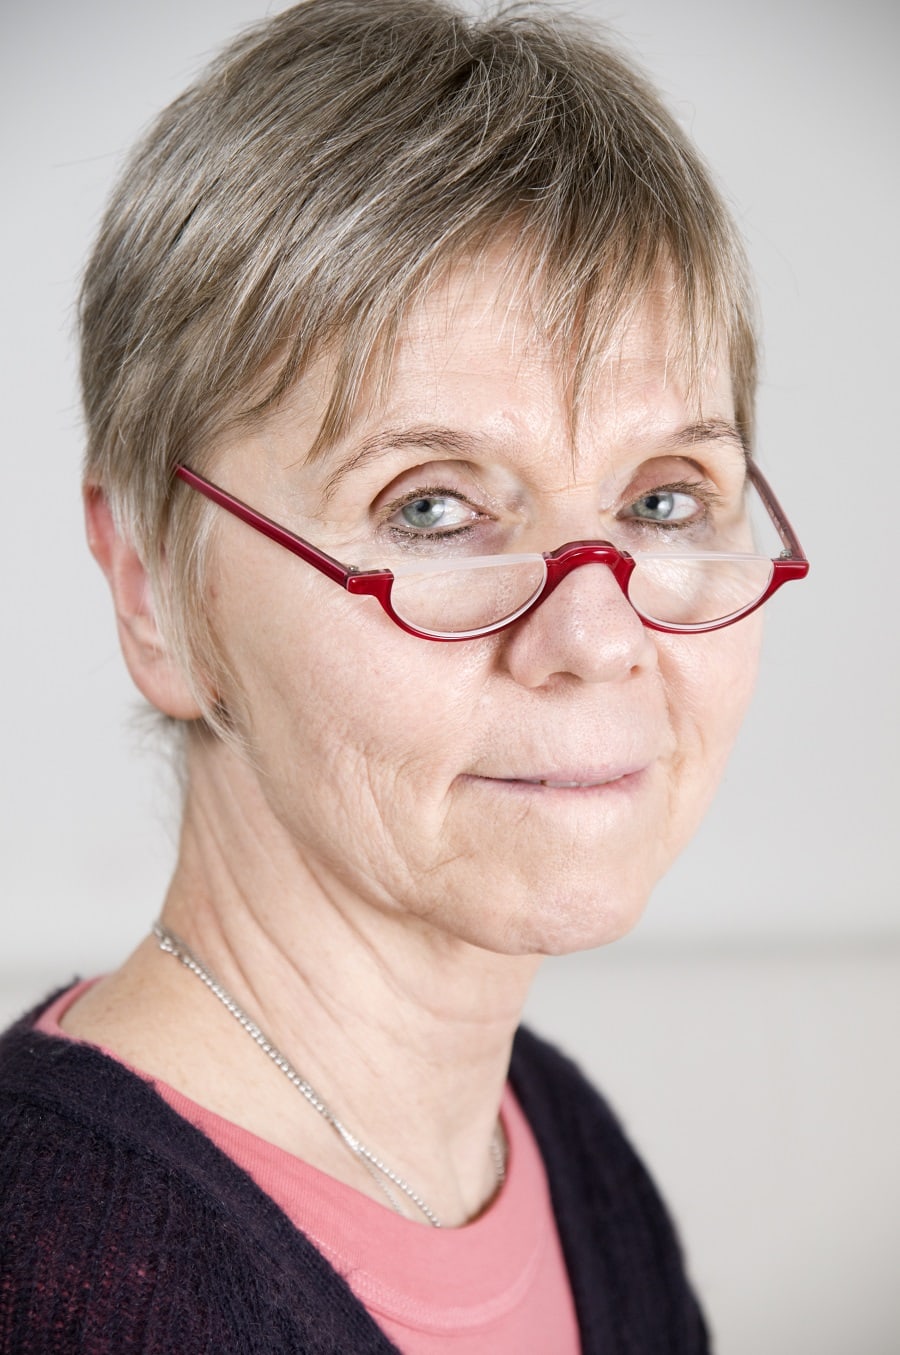 fine pixie haircut for women over 50 with glasses